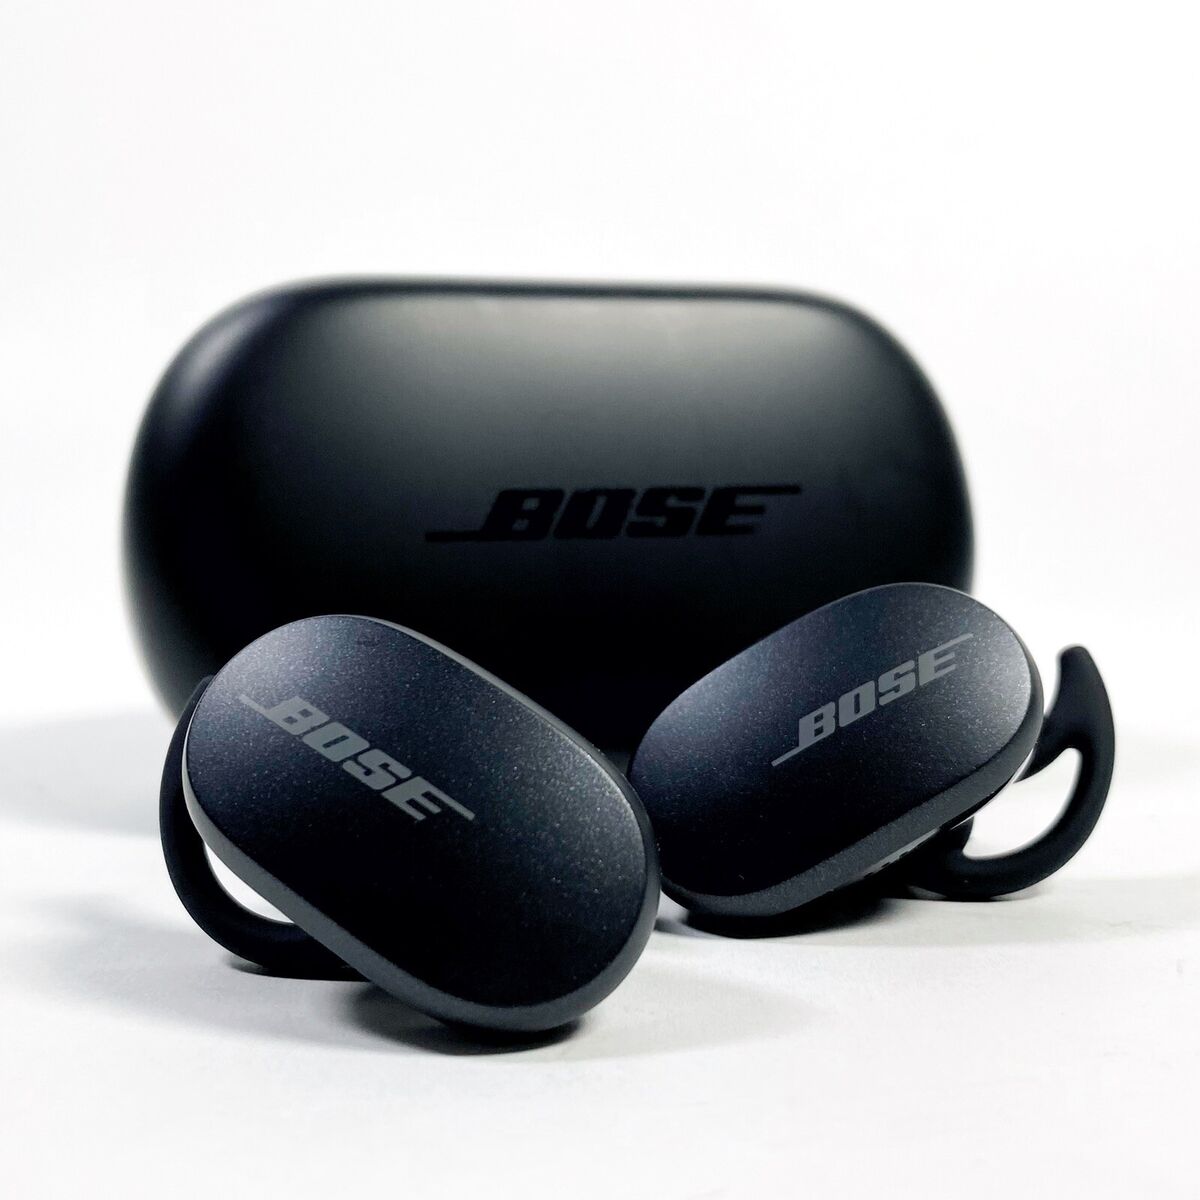 Connecting Bose Wireless Earbuds Effortlessly